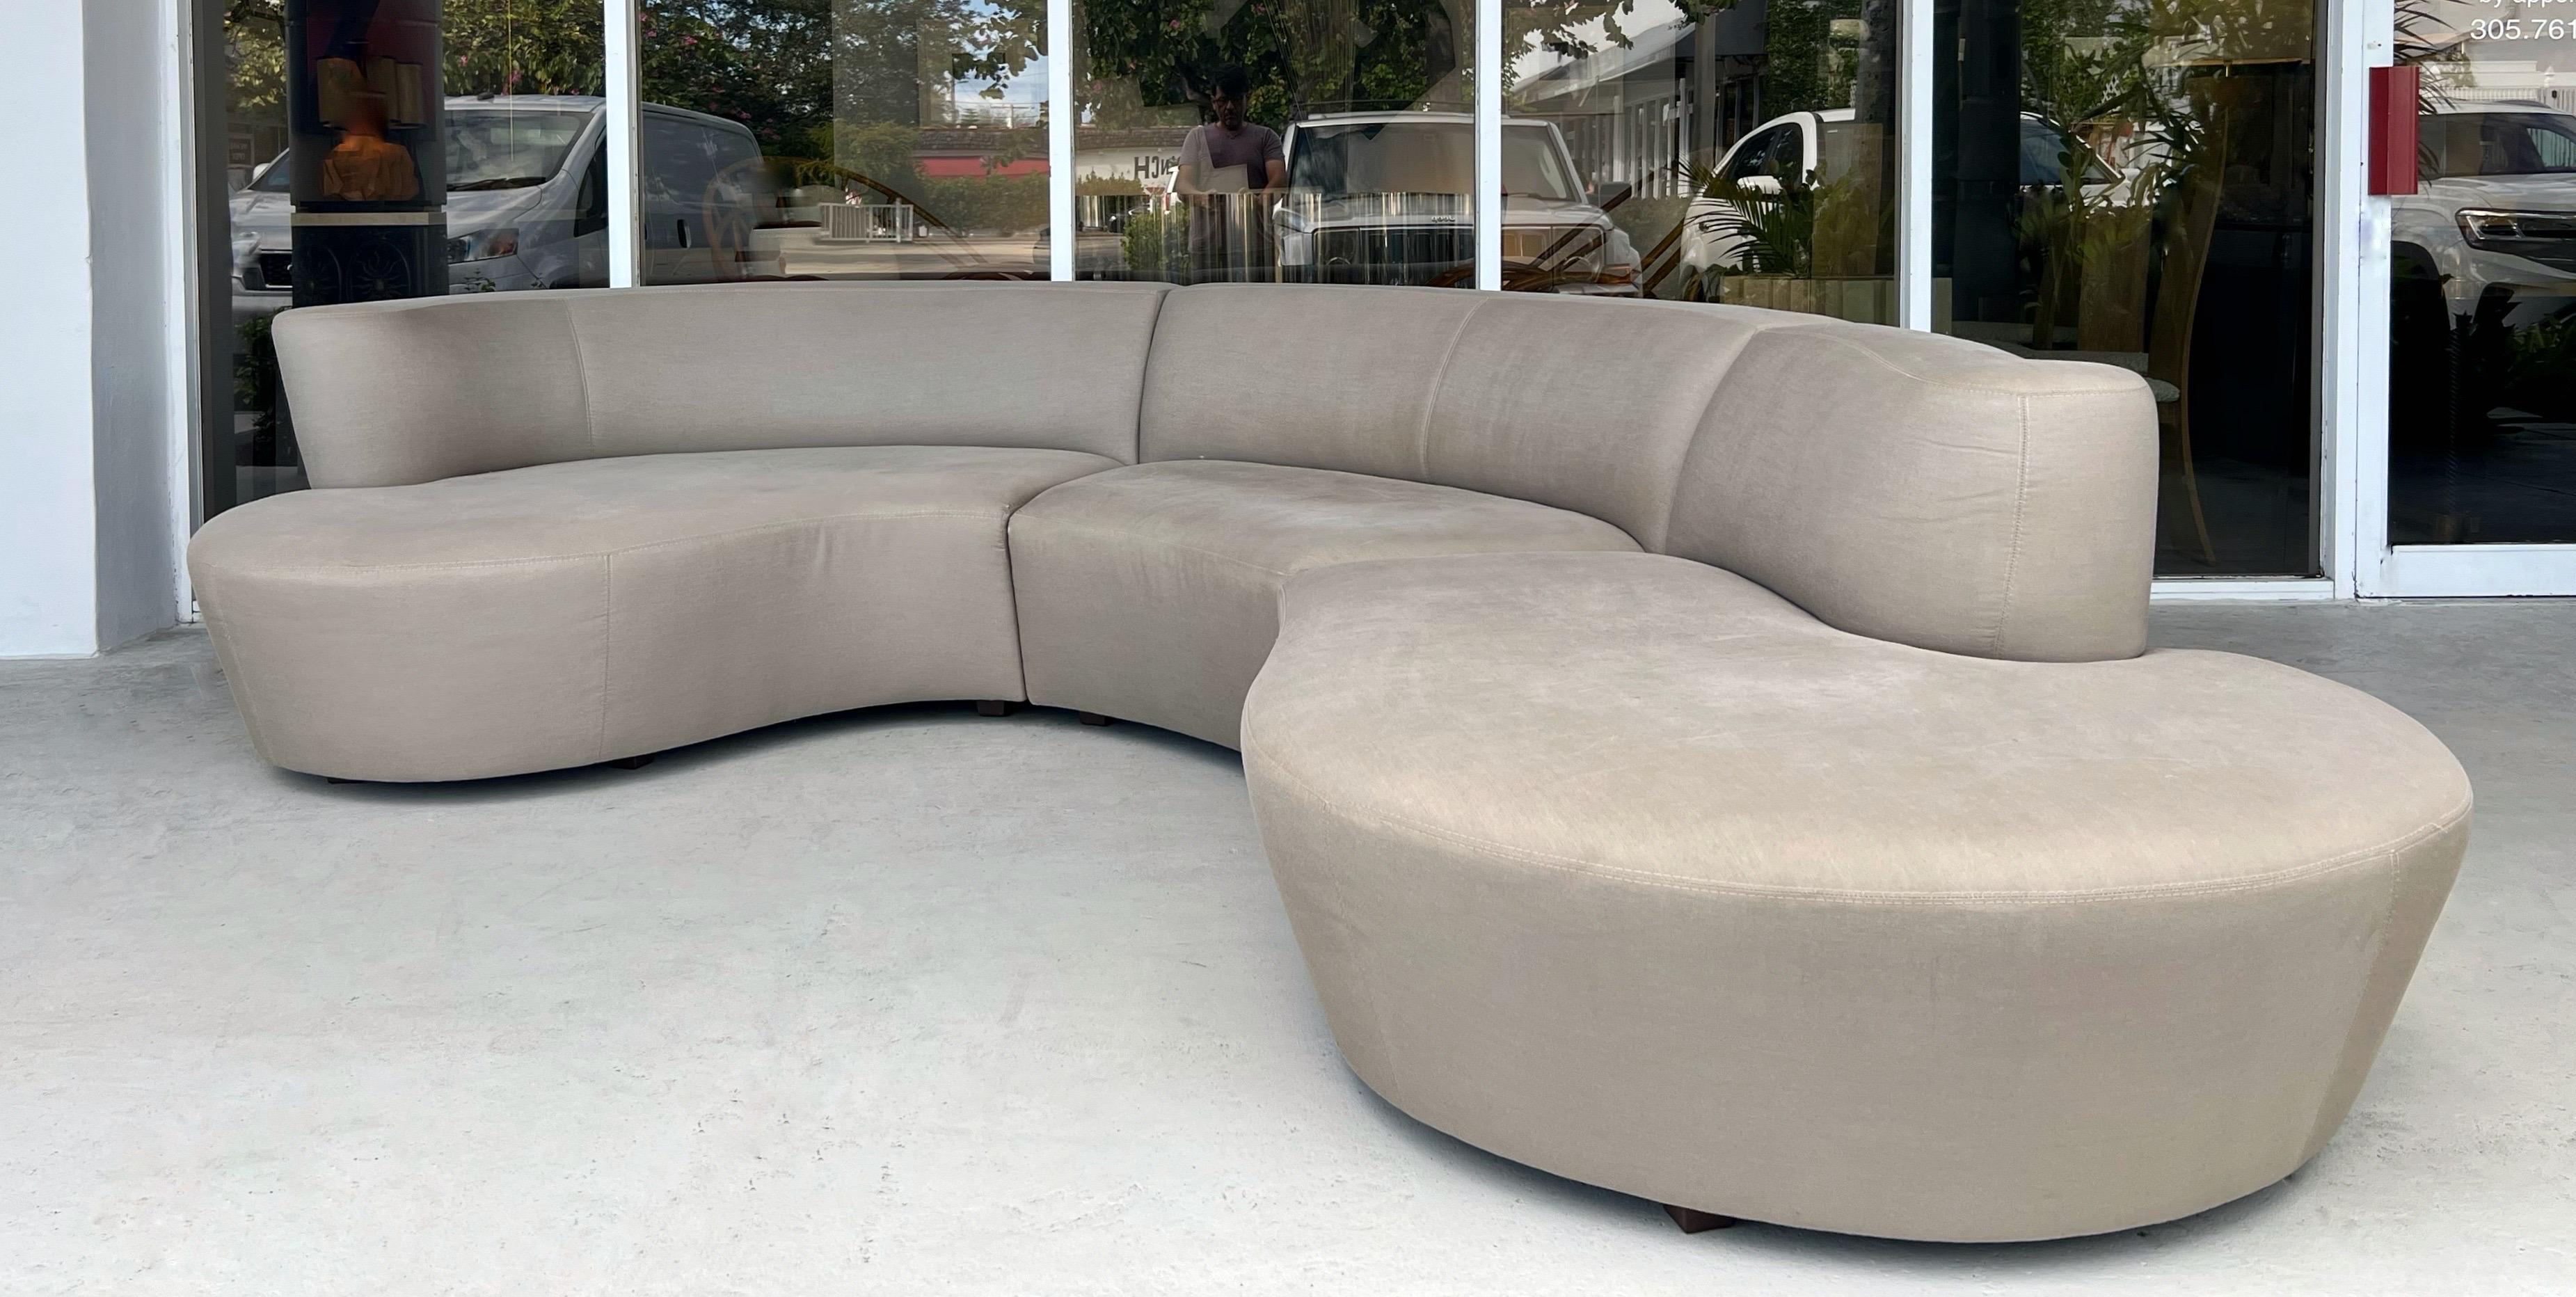 A 3 piece sectional sofa by Vladimir Kagan for Weimar Preview. 
This sofa measures as shown 29